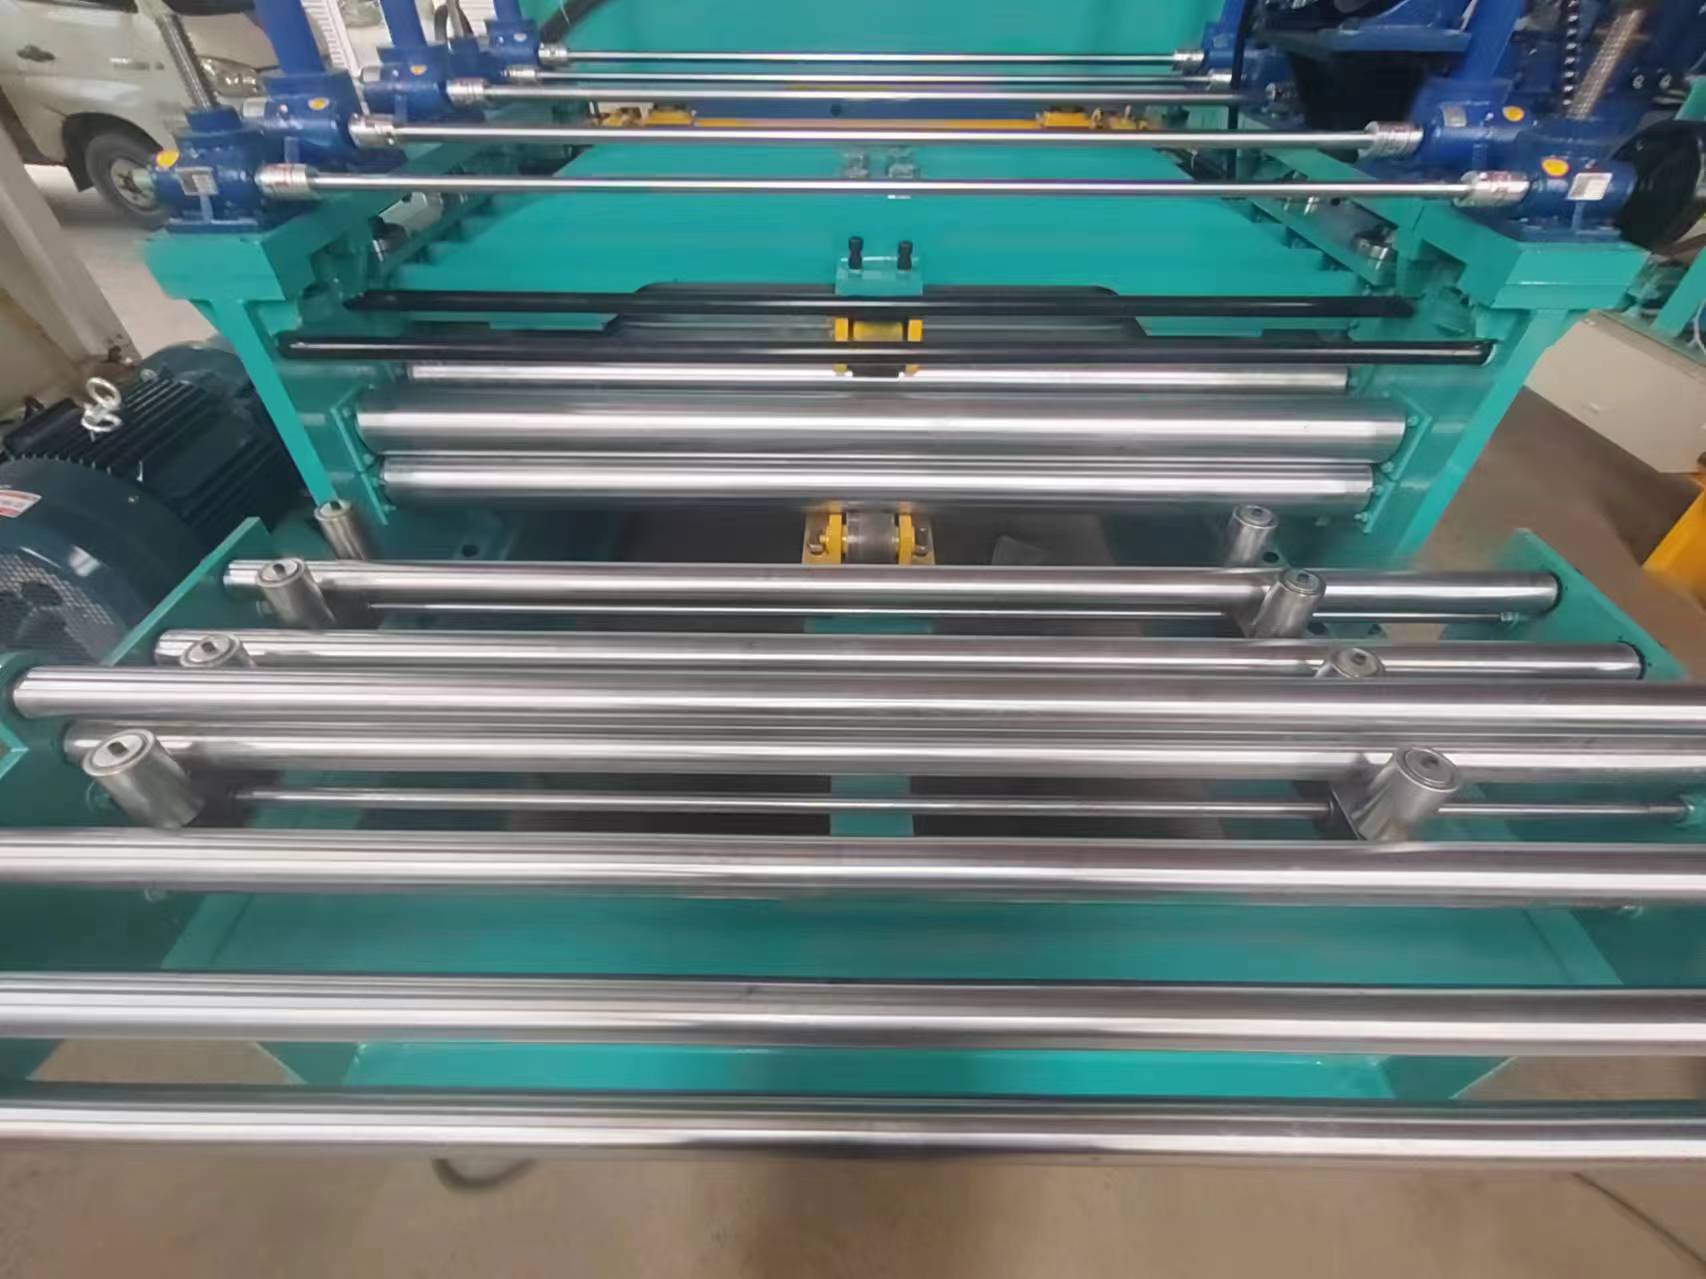 leveling and cut to length machine with slitting